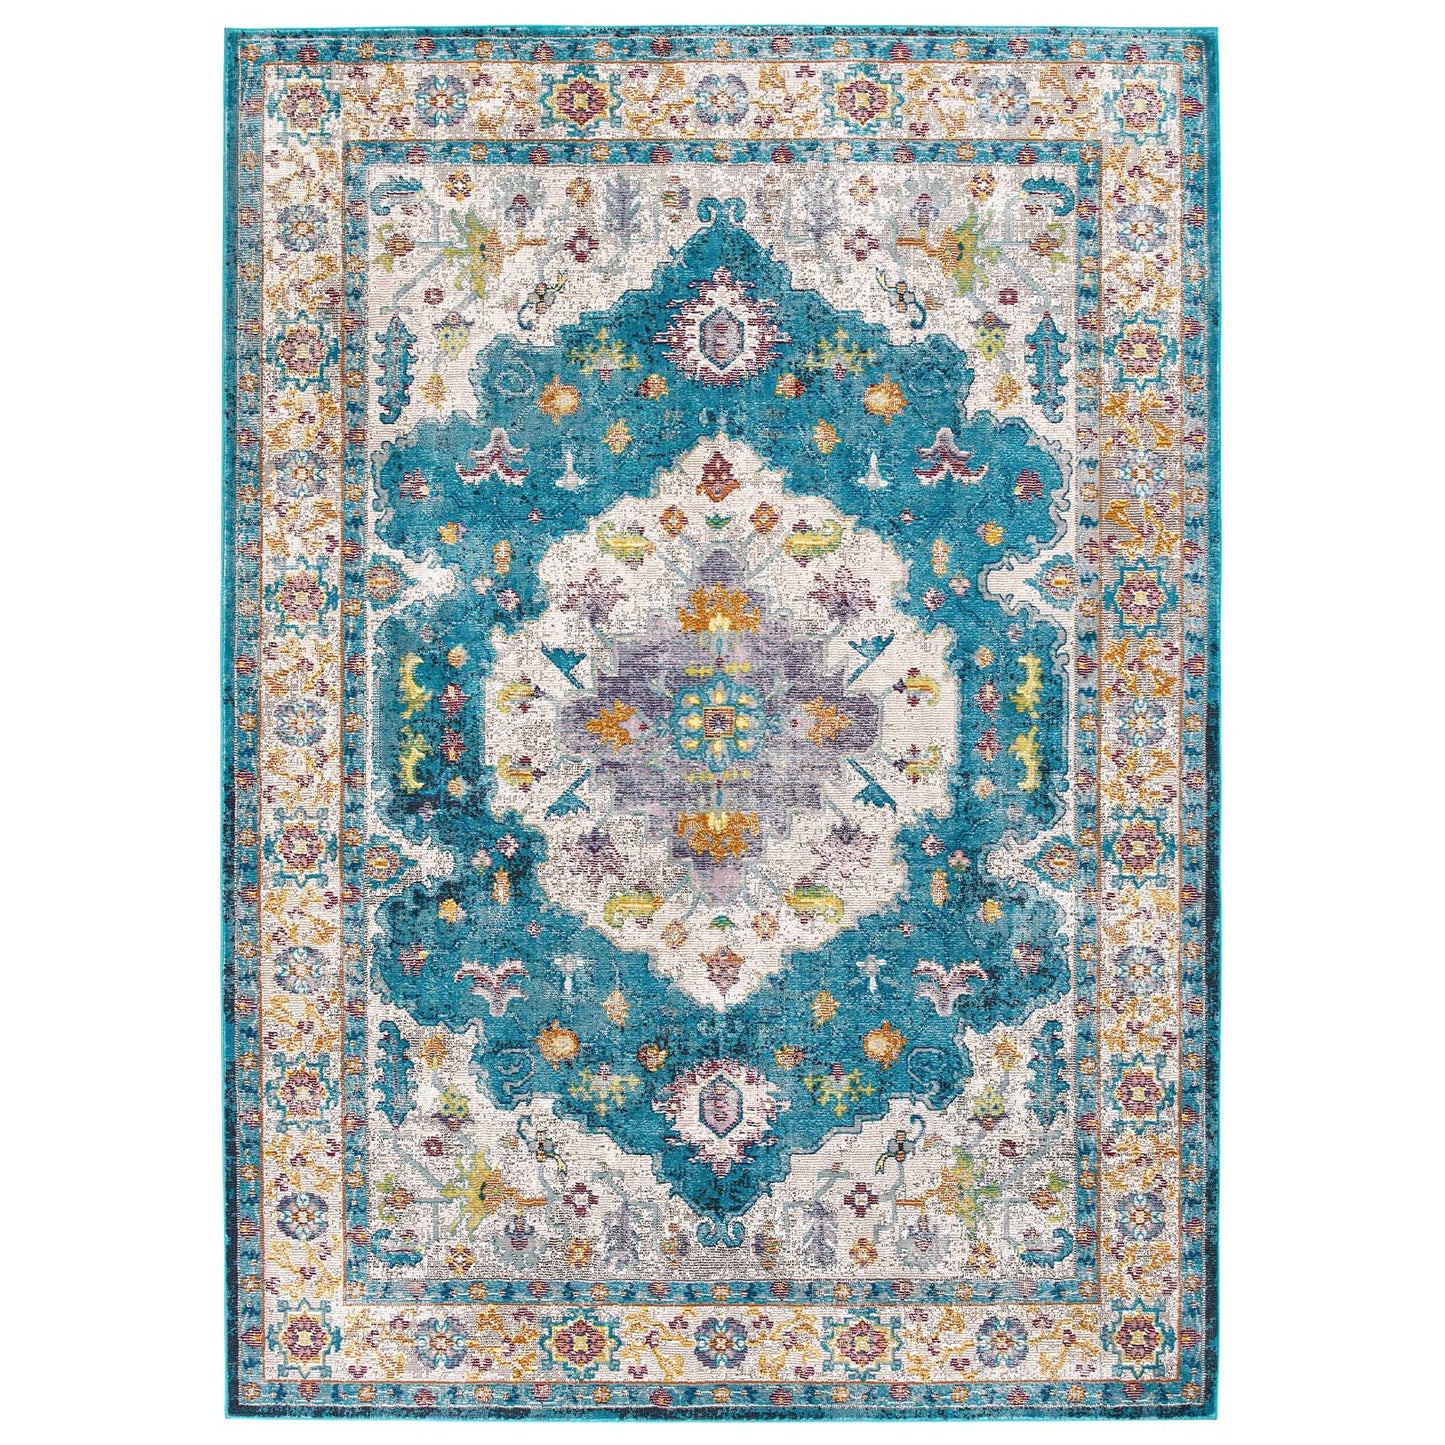 Success Anisah Distressed Floral Persian Medallion 4x6 Area Rug Blue, Ivory, Yellow, Orange R-1163C-46